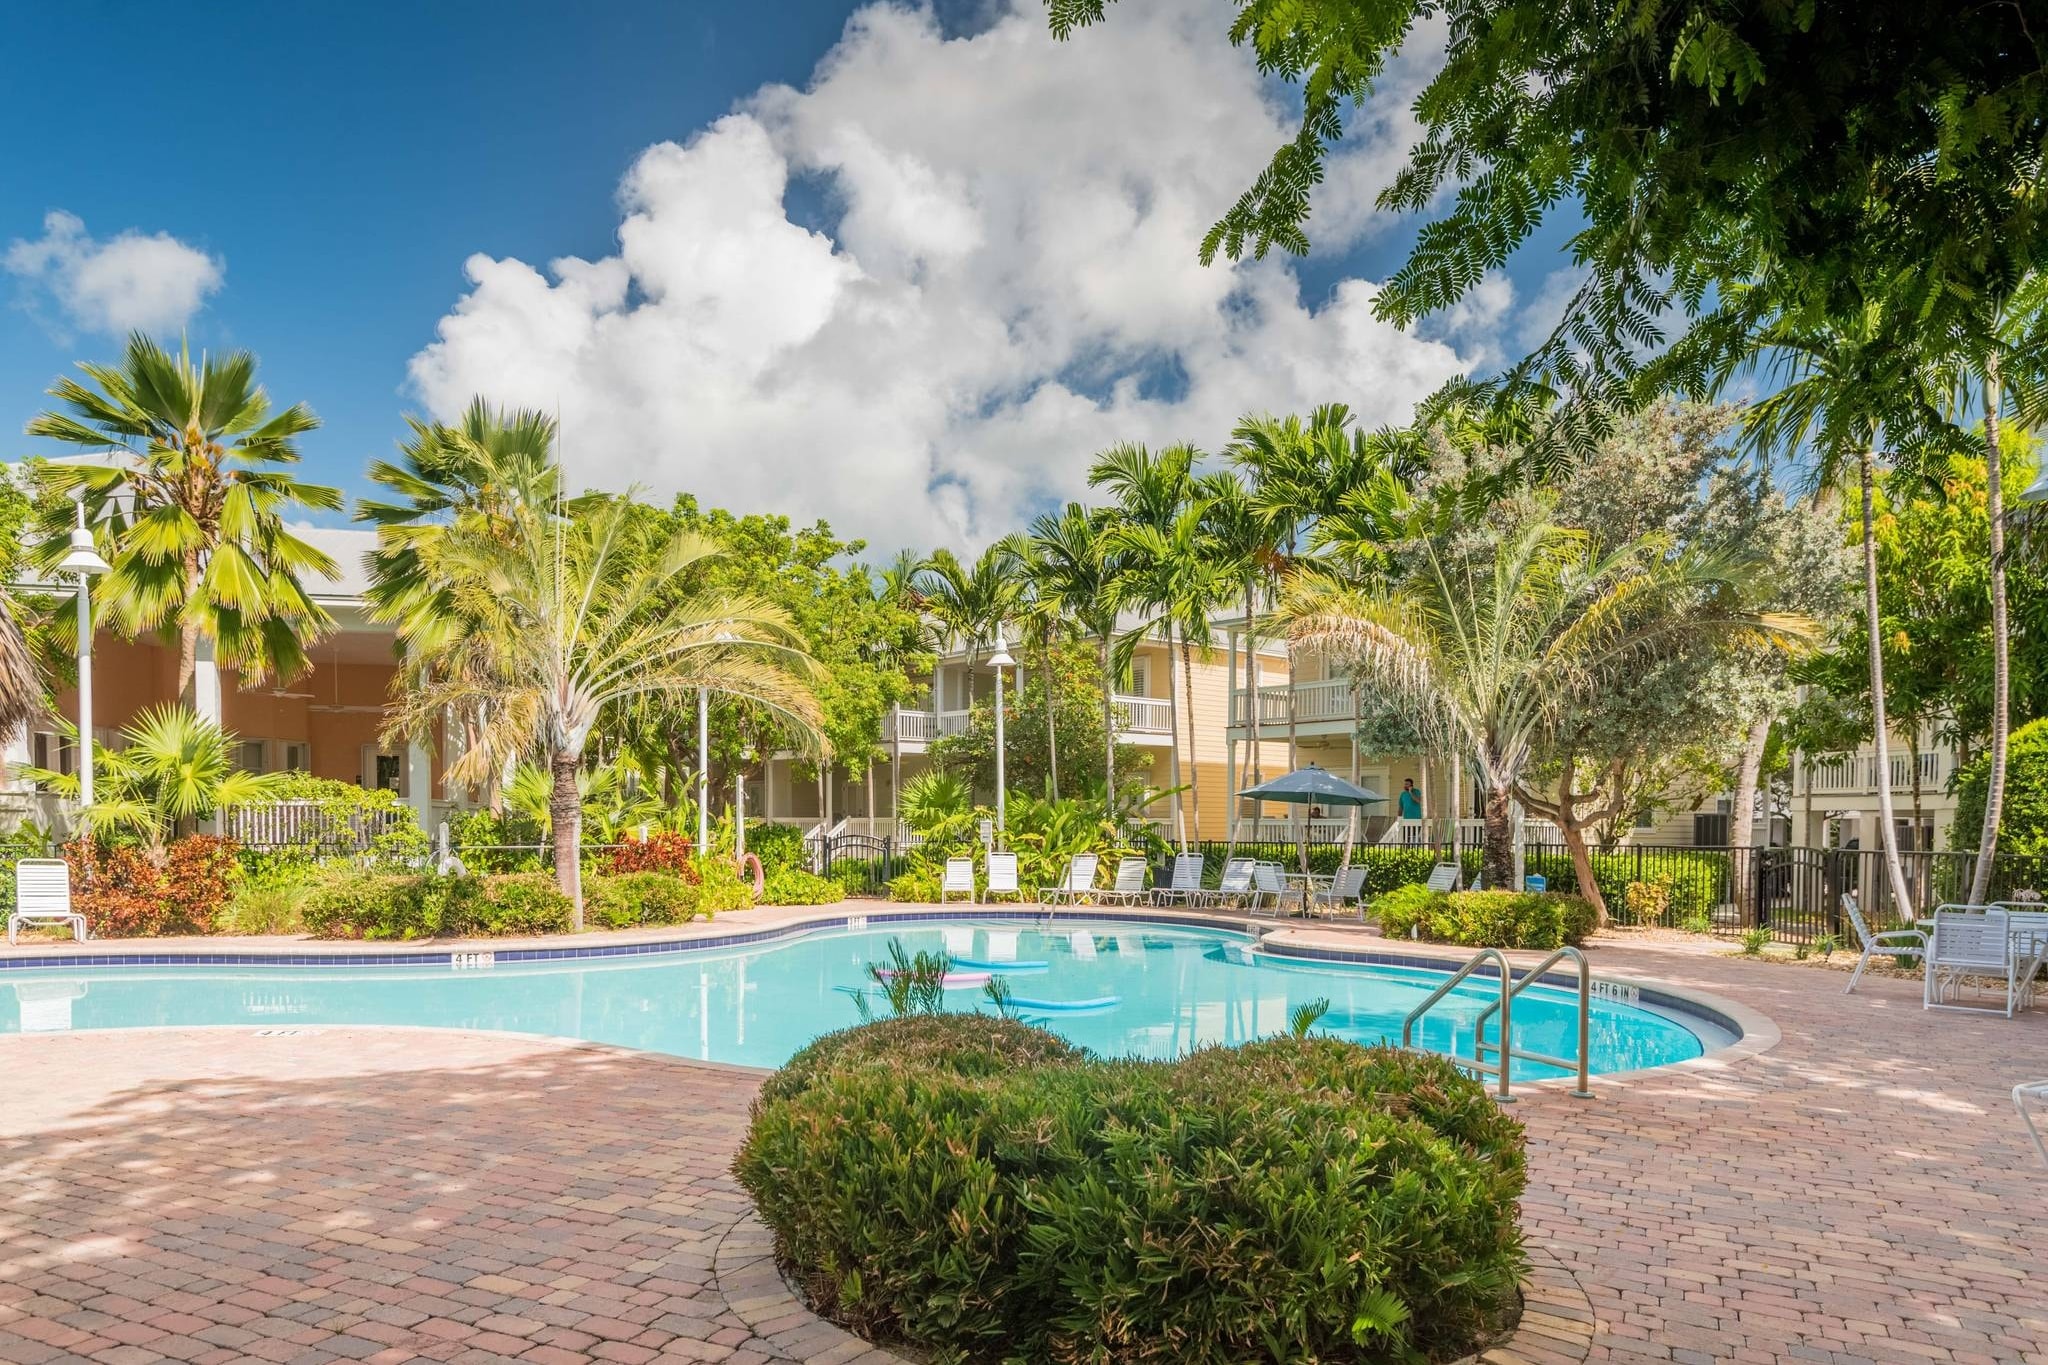 Welcome to Coral Palm, complete with a community pool!